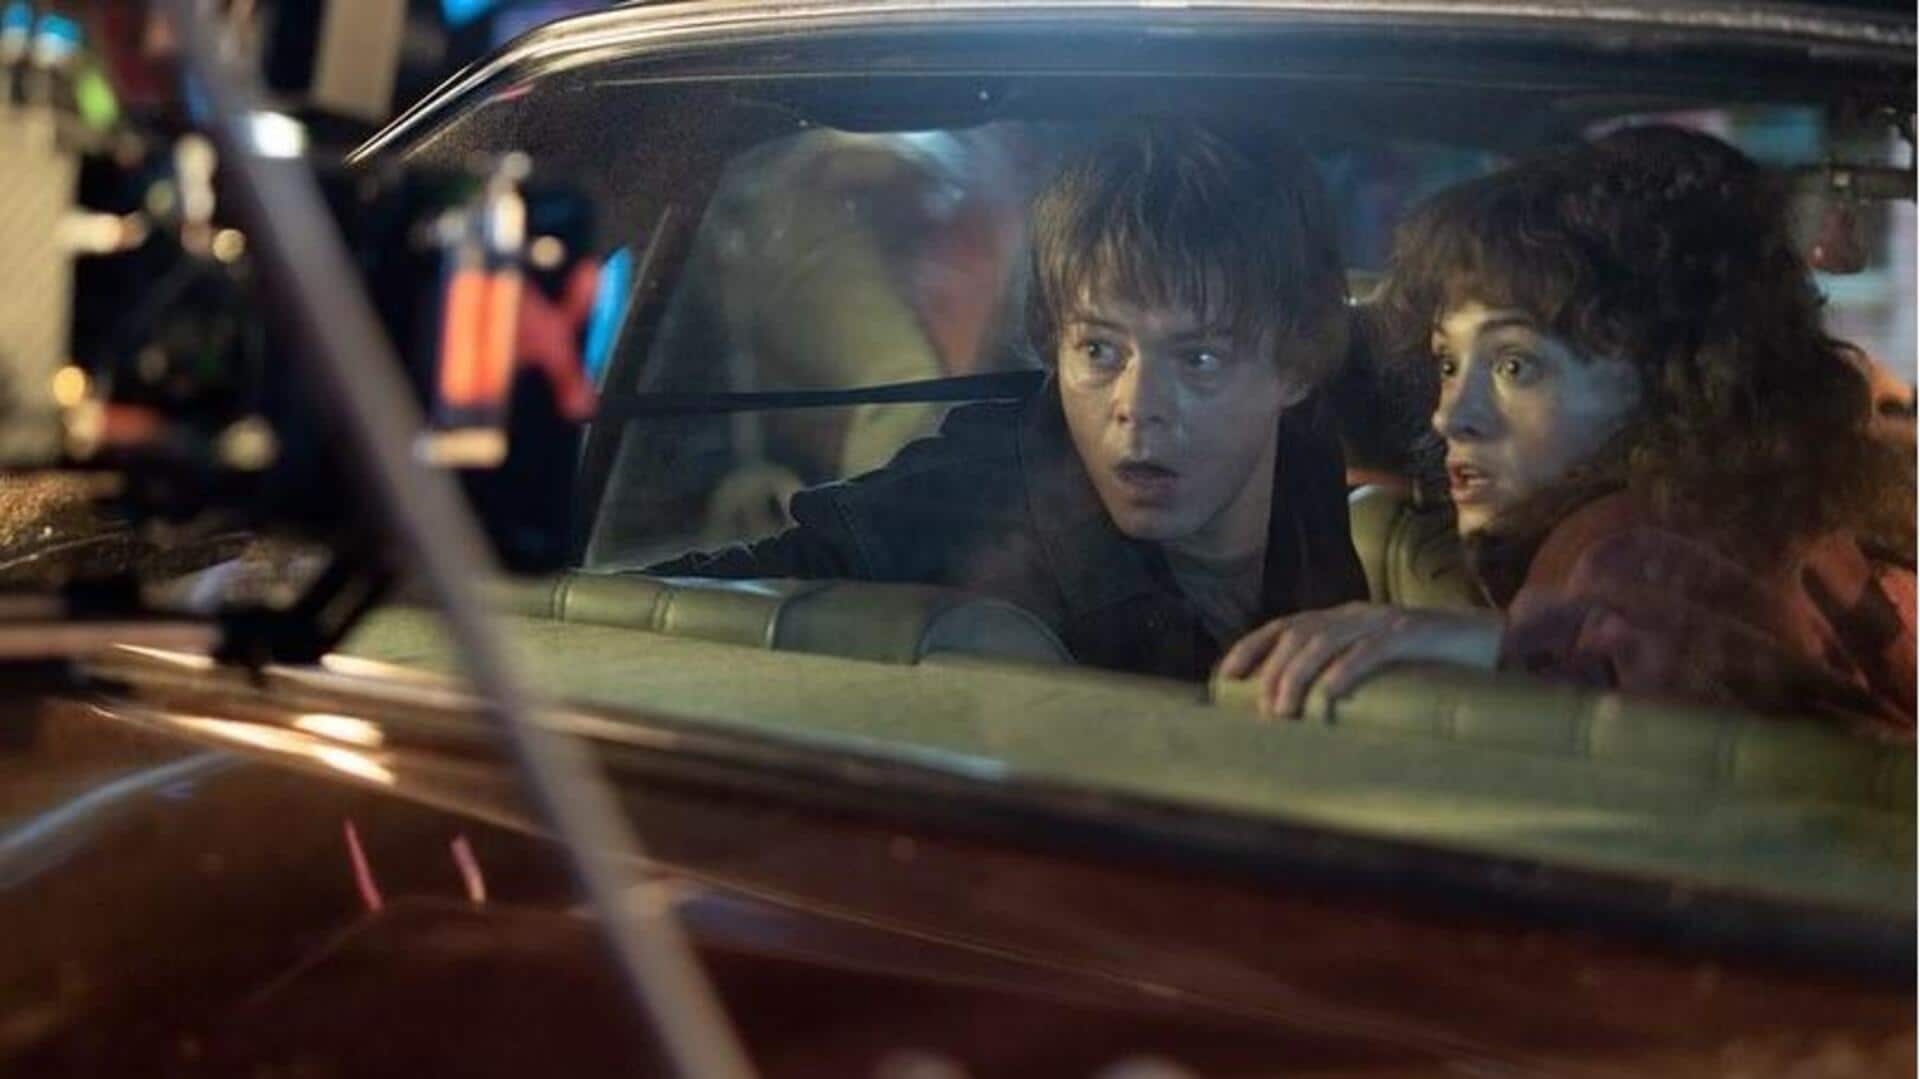 New behind-the-scenes images tease intense scenes in 'Stranger Things' S5